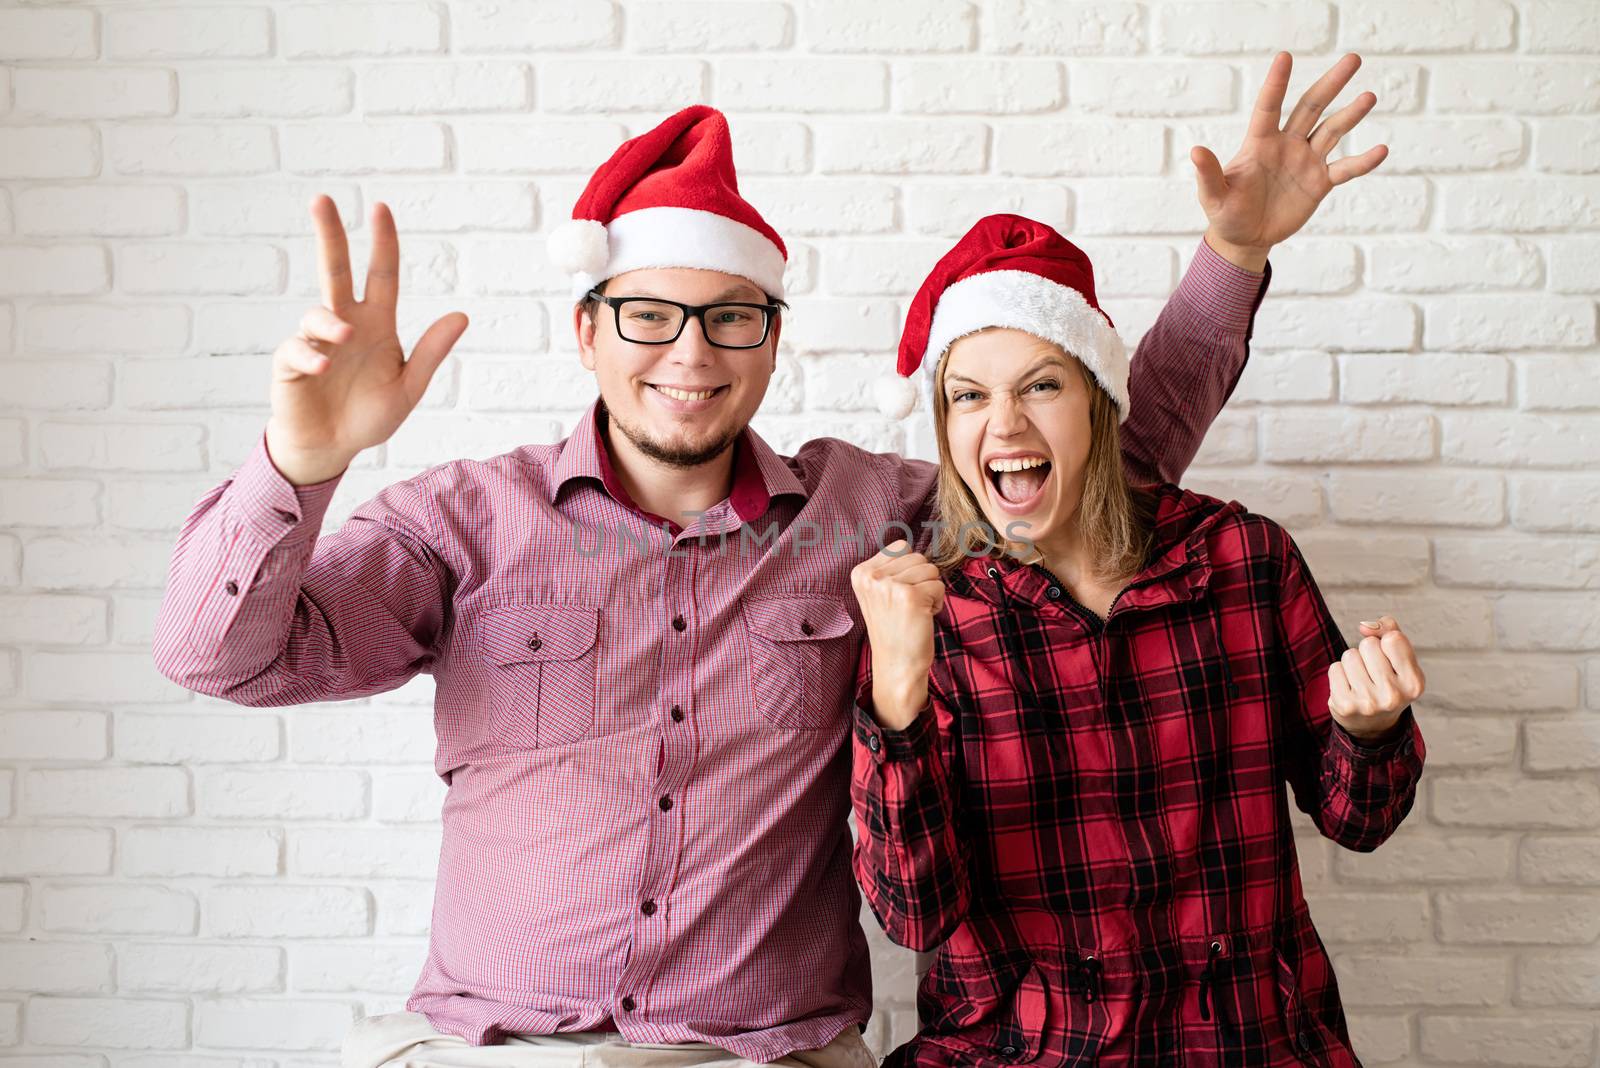 Happy christmas couple in santa hats holding gift boxes on white brick wall background